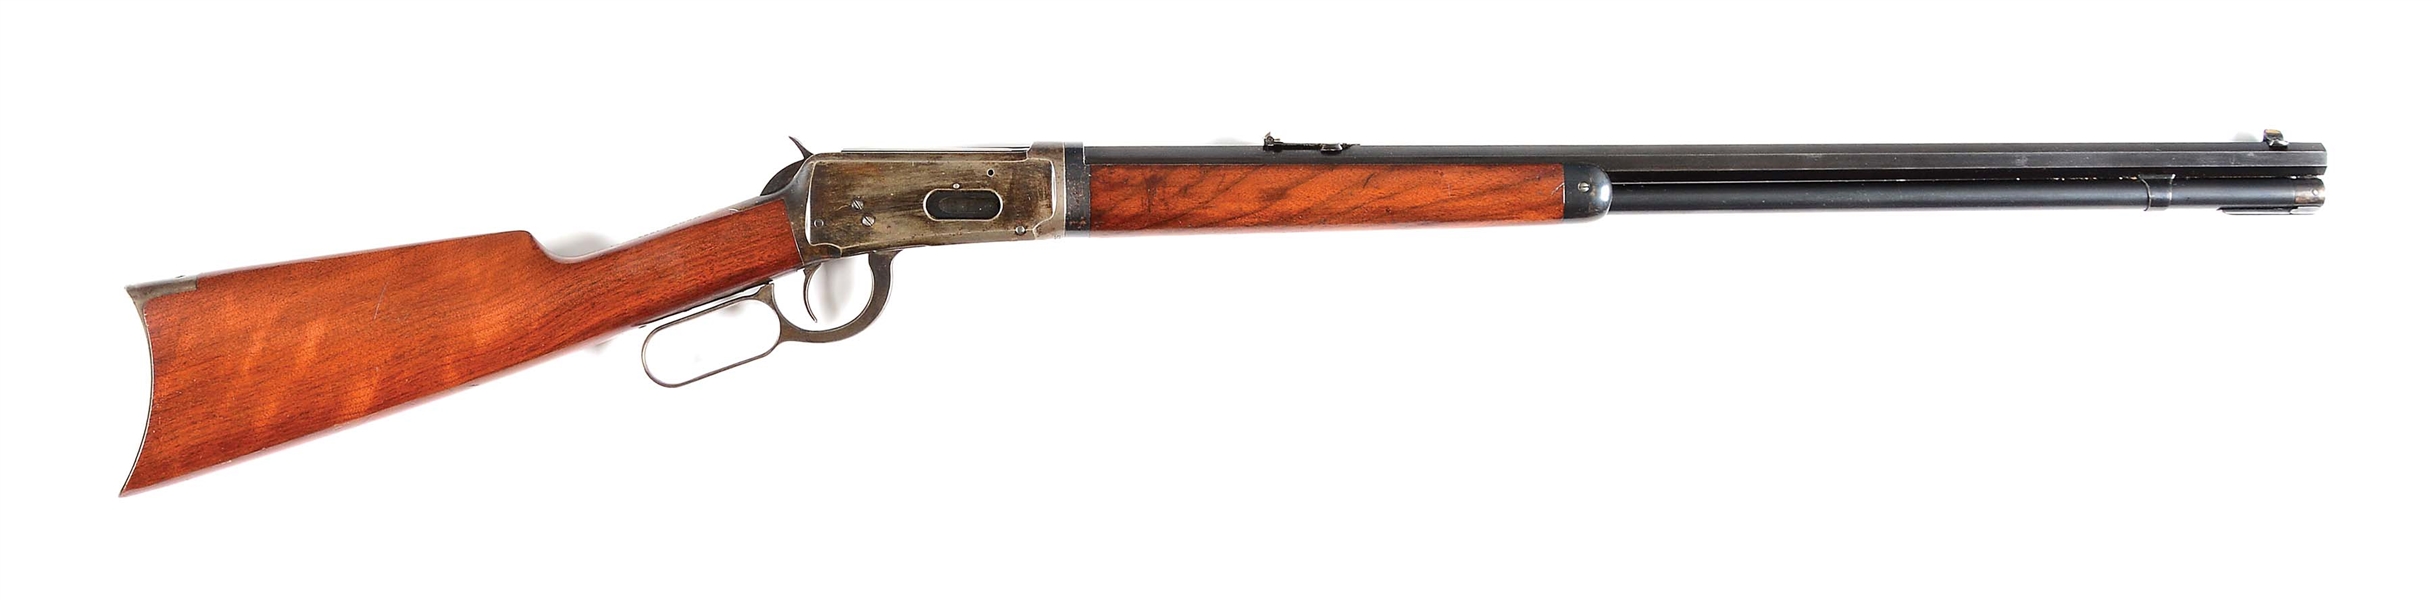 (C) WINCHESTER MODEL 1894 TAKEDOWN LEVER ACTION RIFLE (1910).